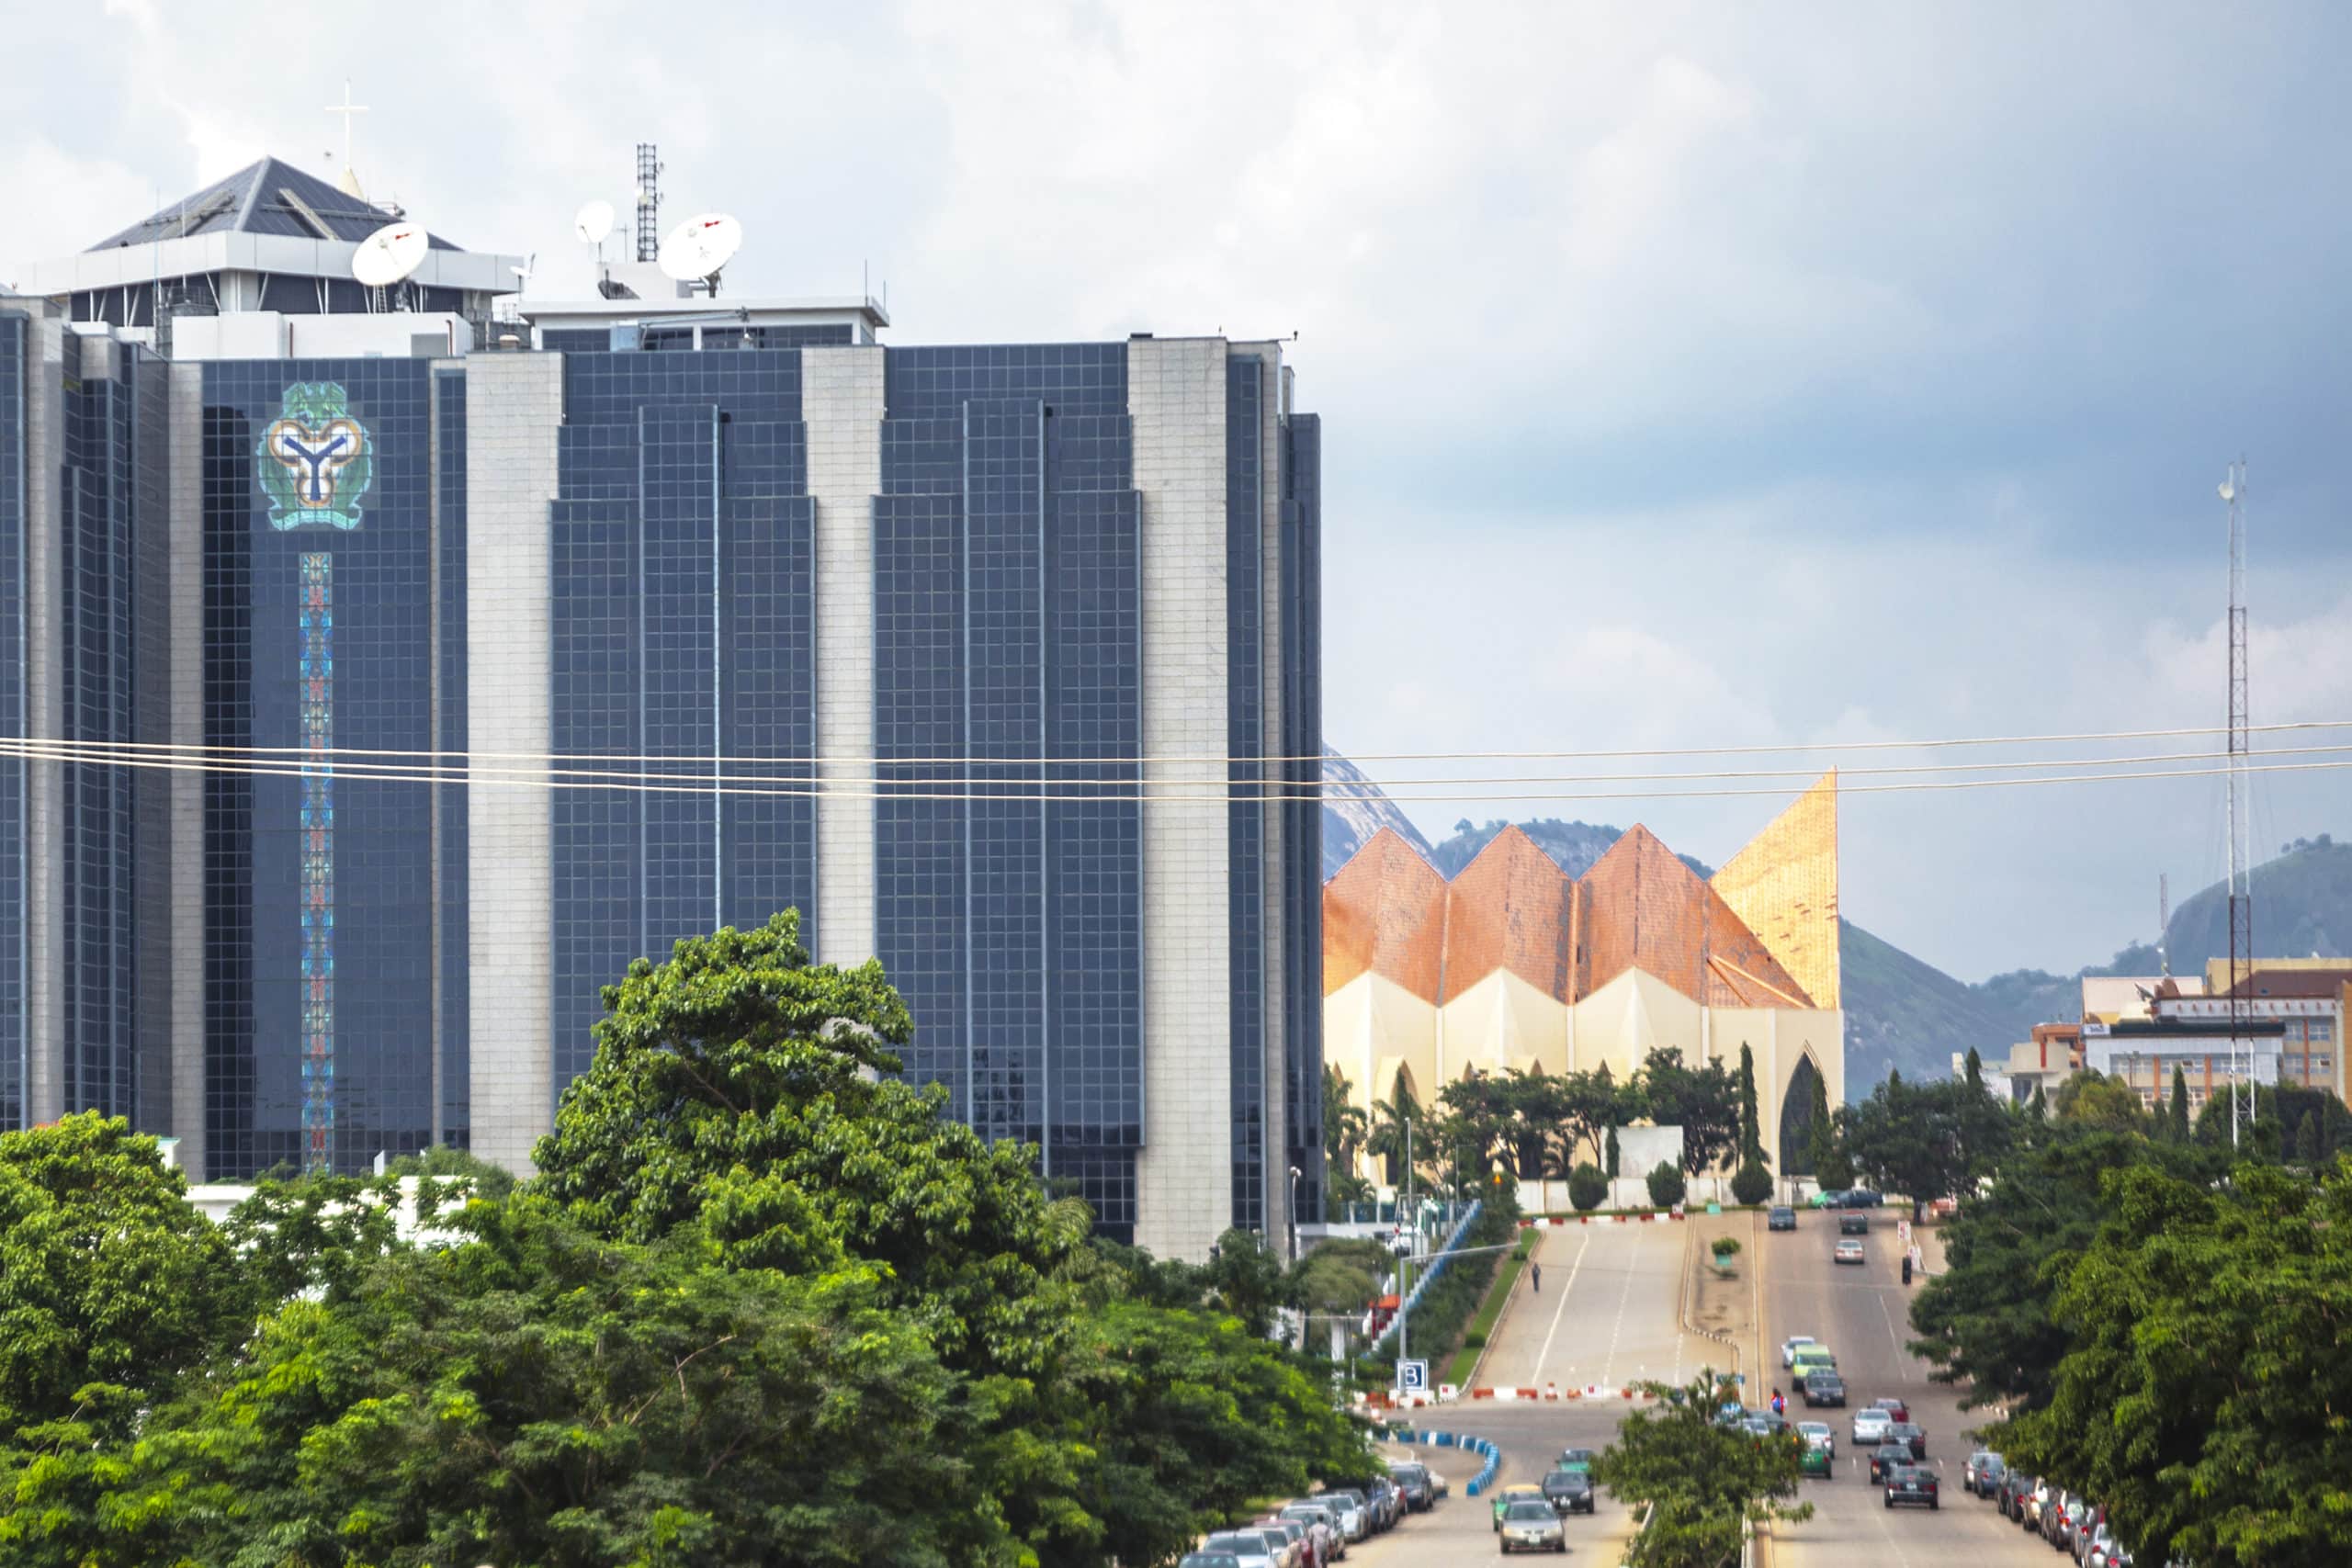 Central Bank of Nigeria headquarters in Abuja.